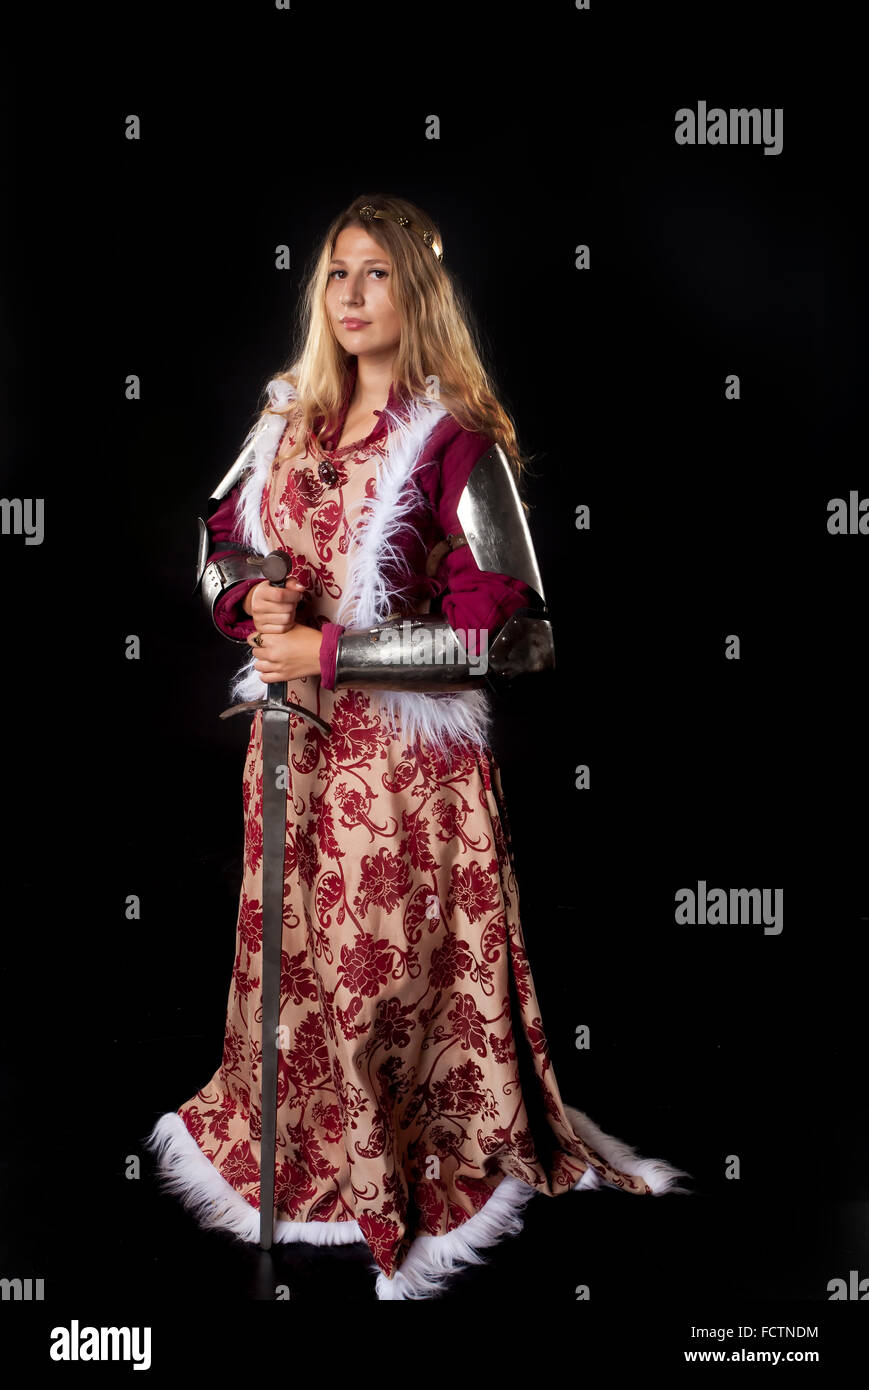 Studio portrait of medieval girl with golden hair and royal posture leaning on a sword Stock Photo